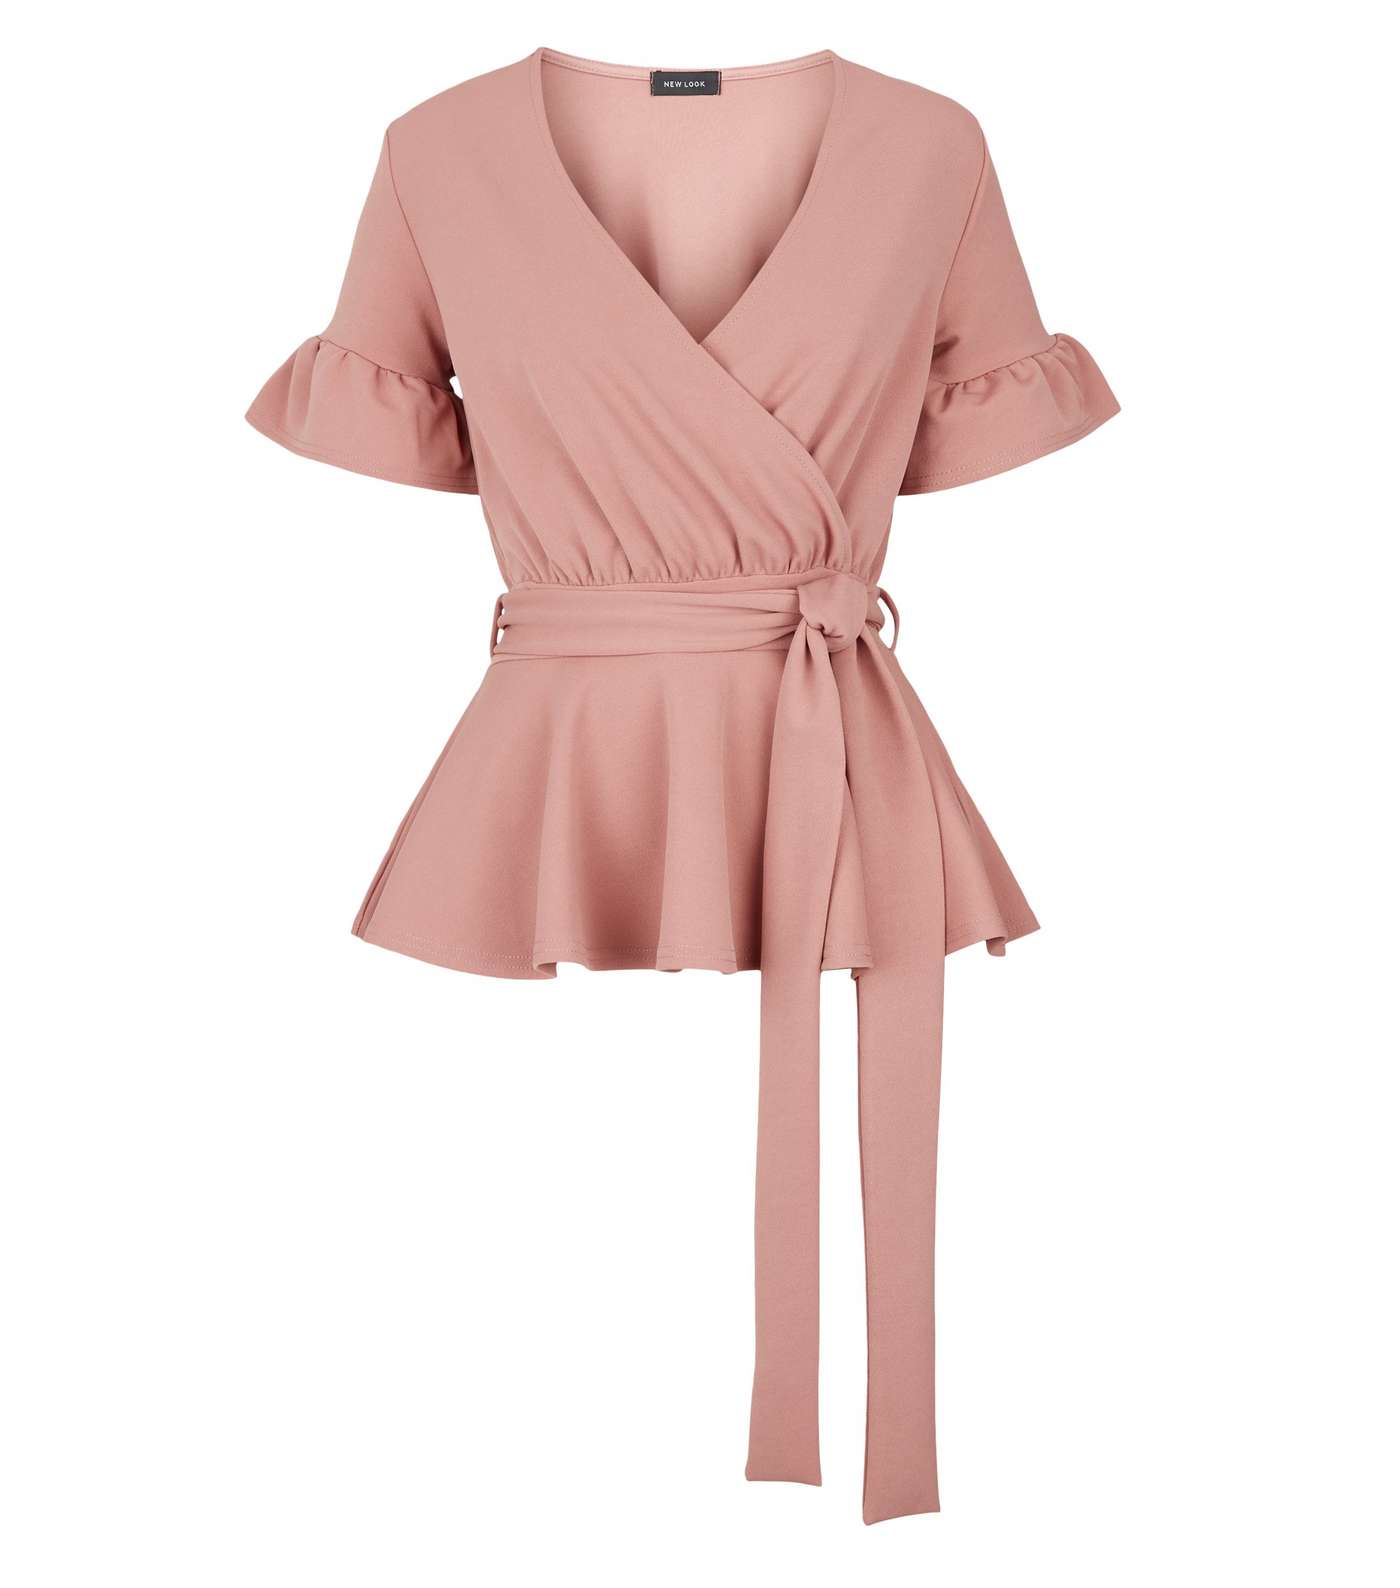 Pale Pink Belted Peplum Top Image 4